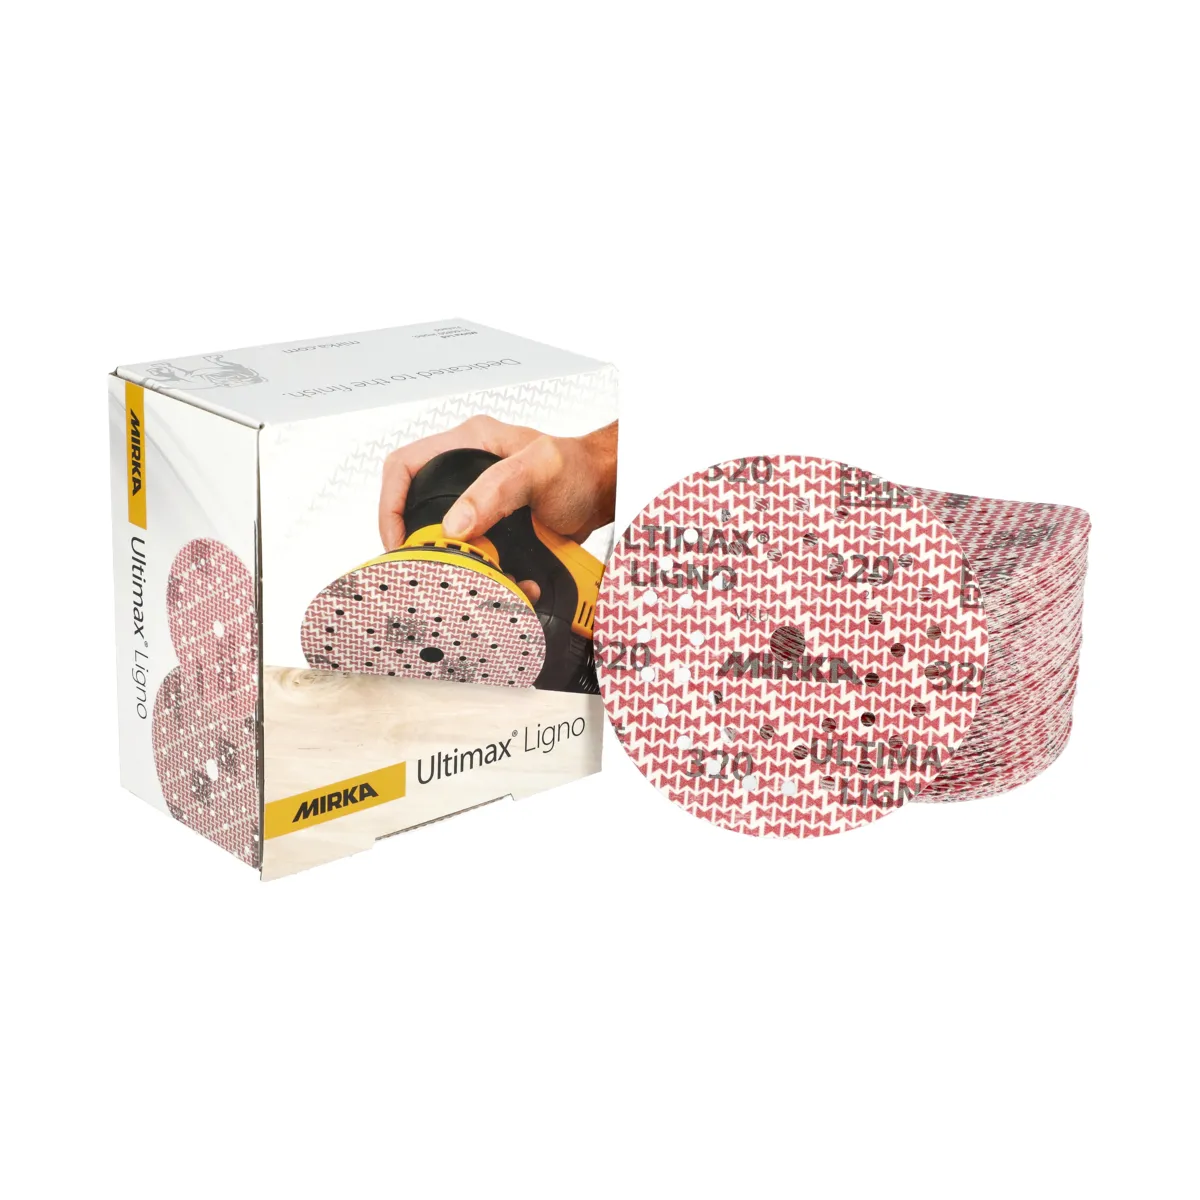 A box of the pink sponge is sitting on top of it.